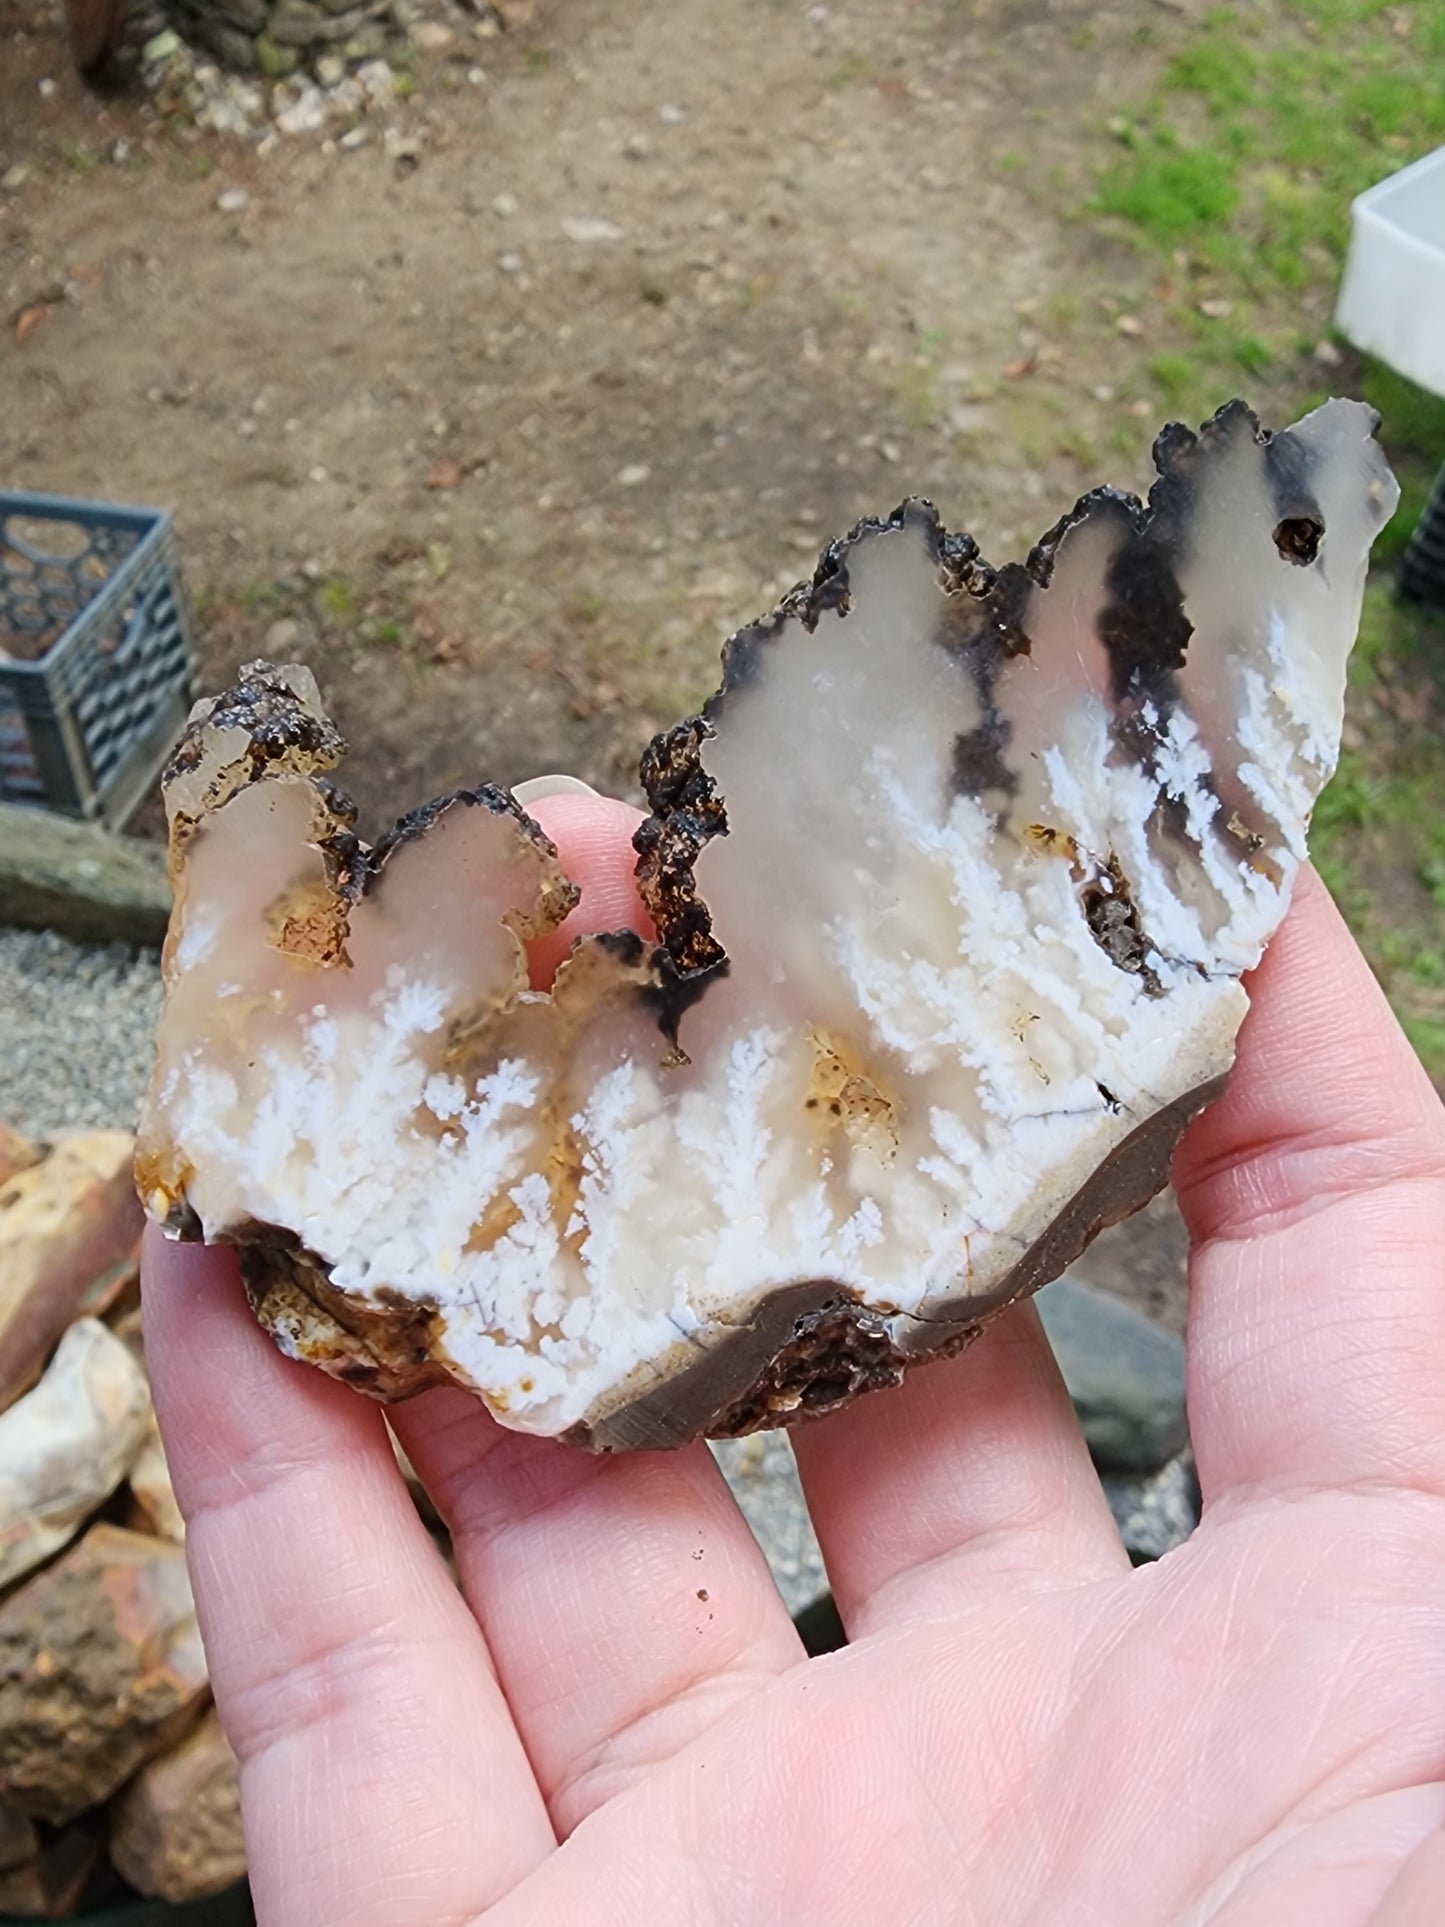 Stinking water plume agate slab